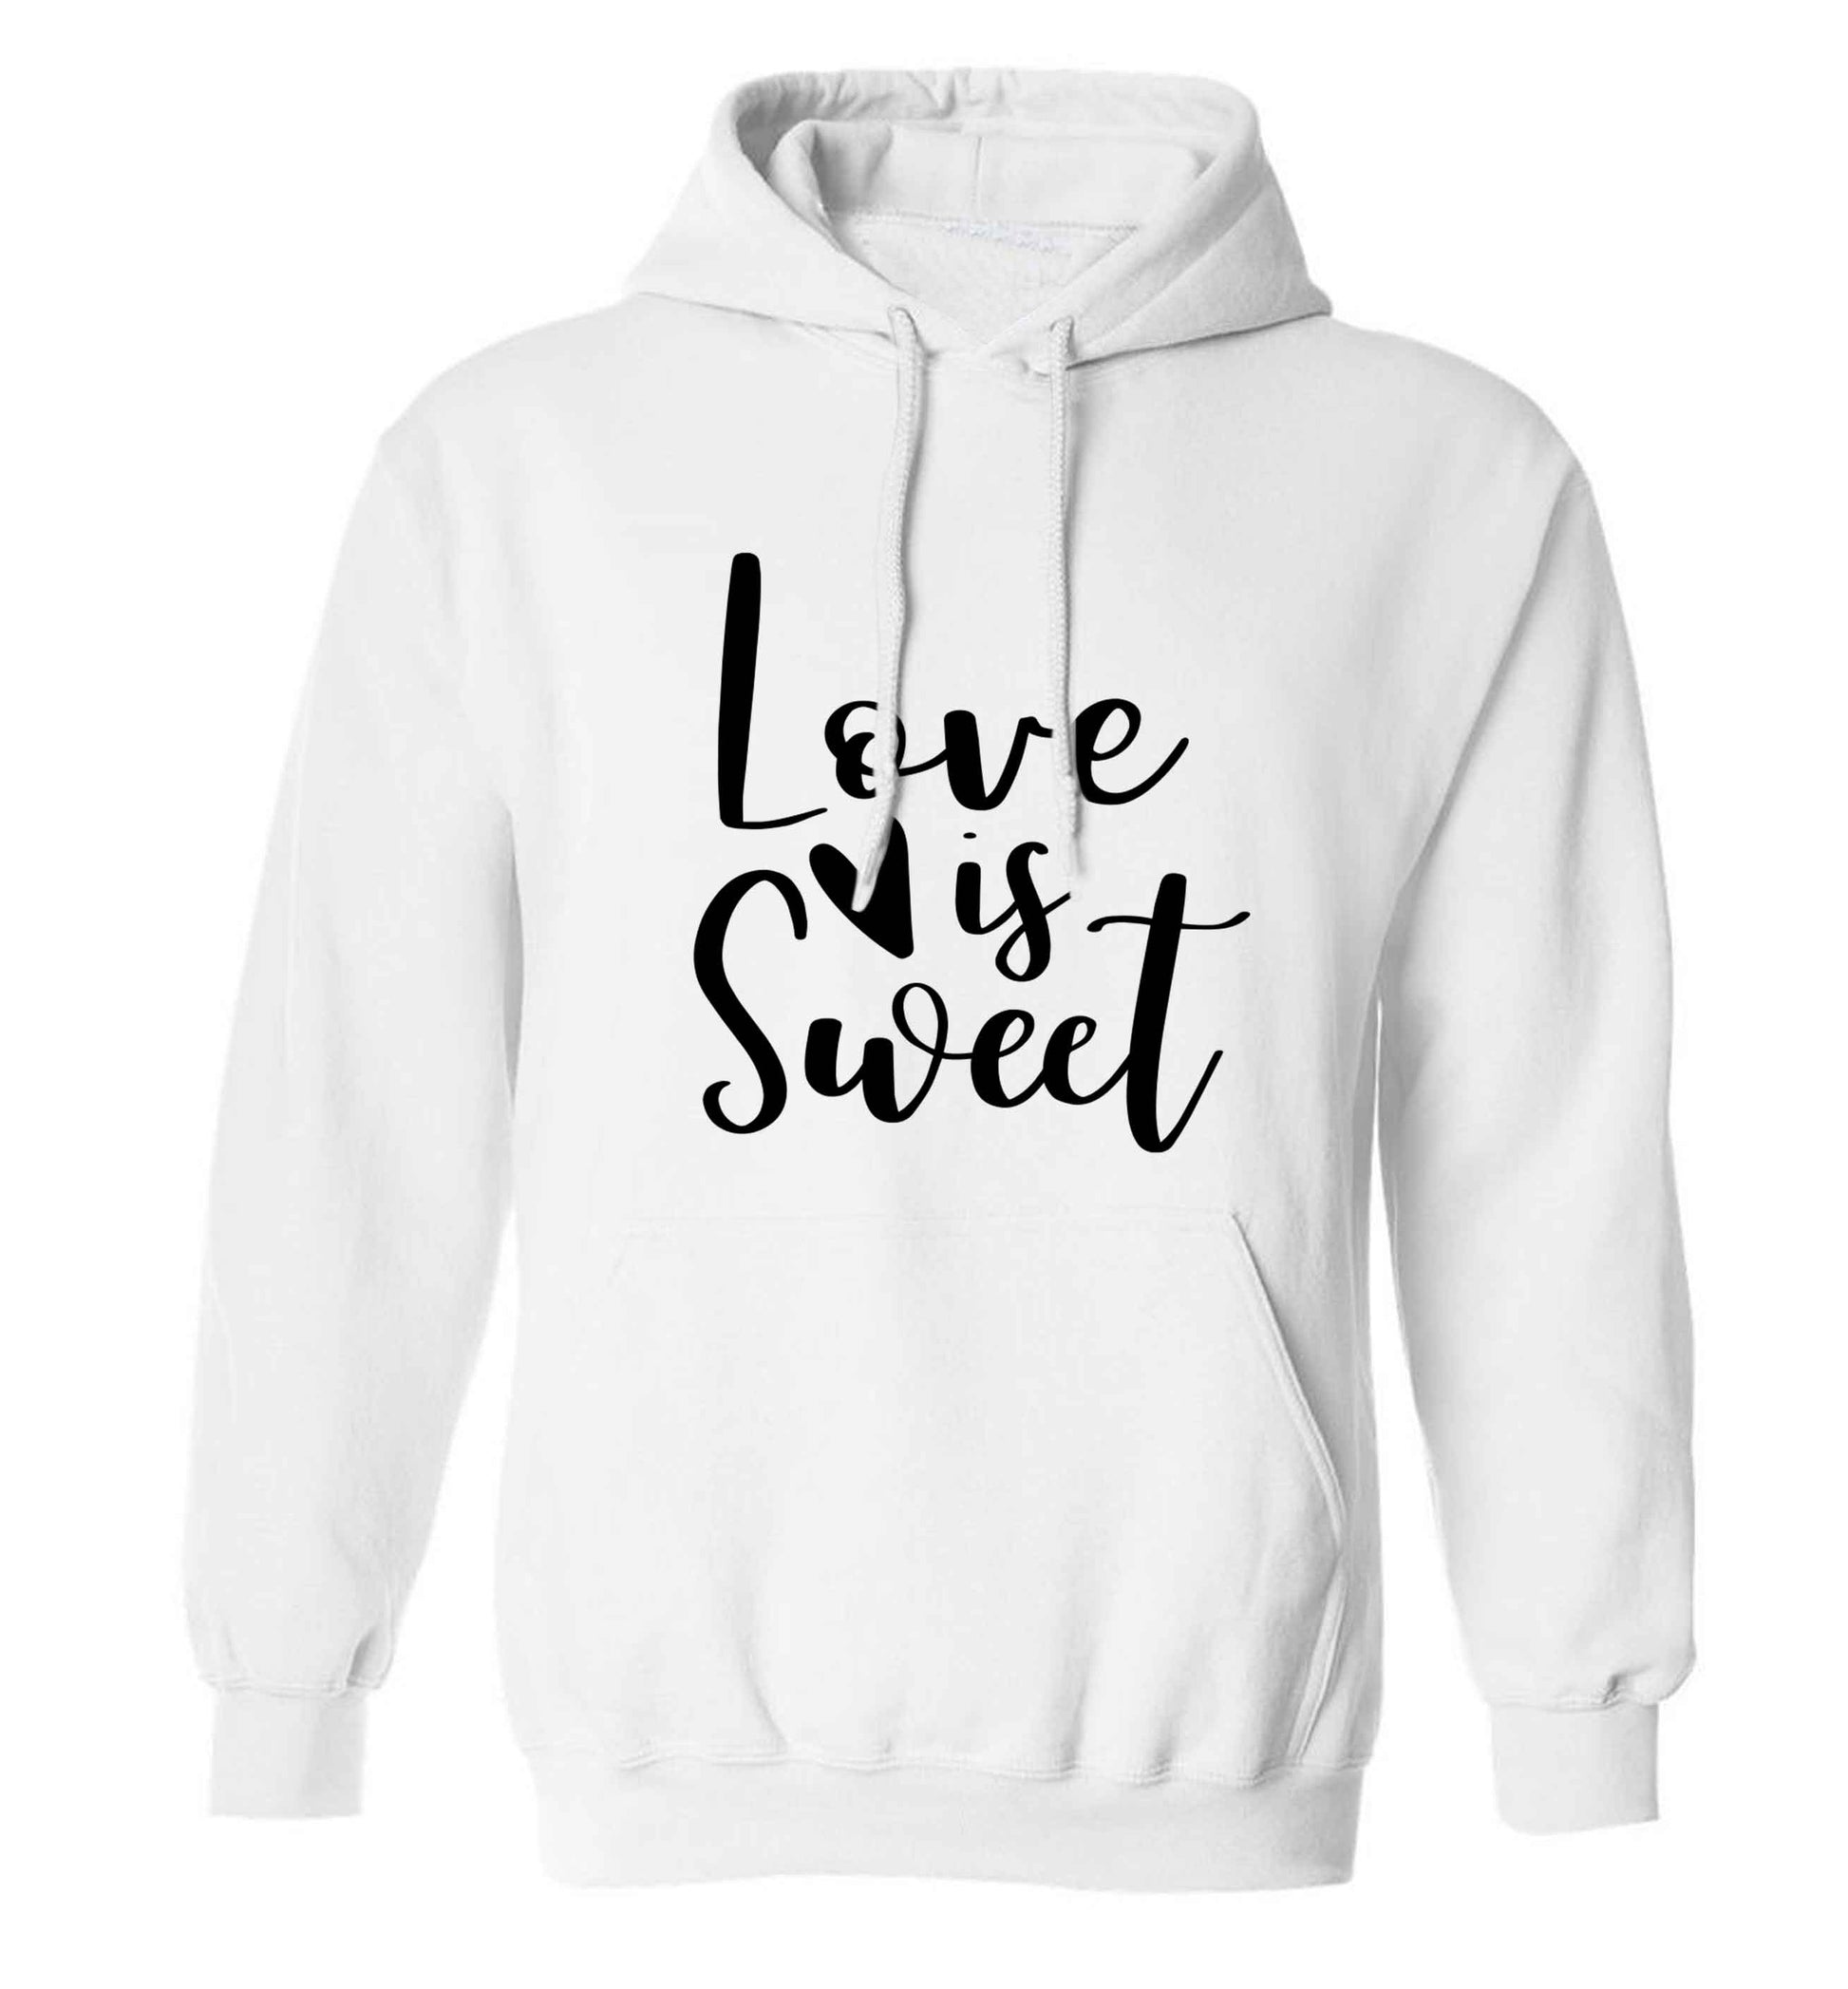 Love really does make the world go round! Ideal for weddings, valentines or just simply to show someone you love them!  adults unisex white hoodie 2XL